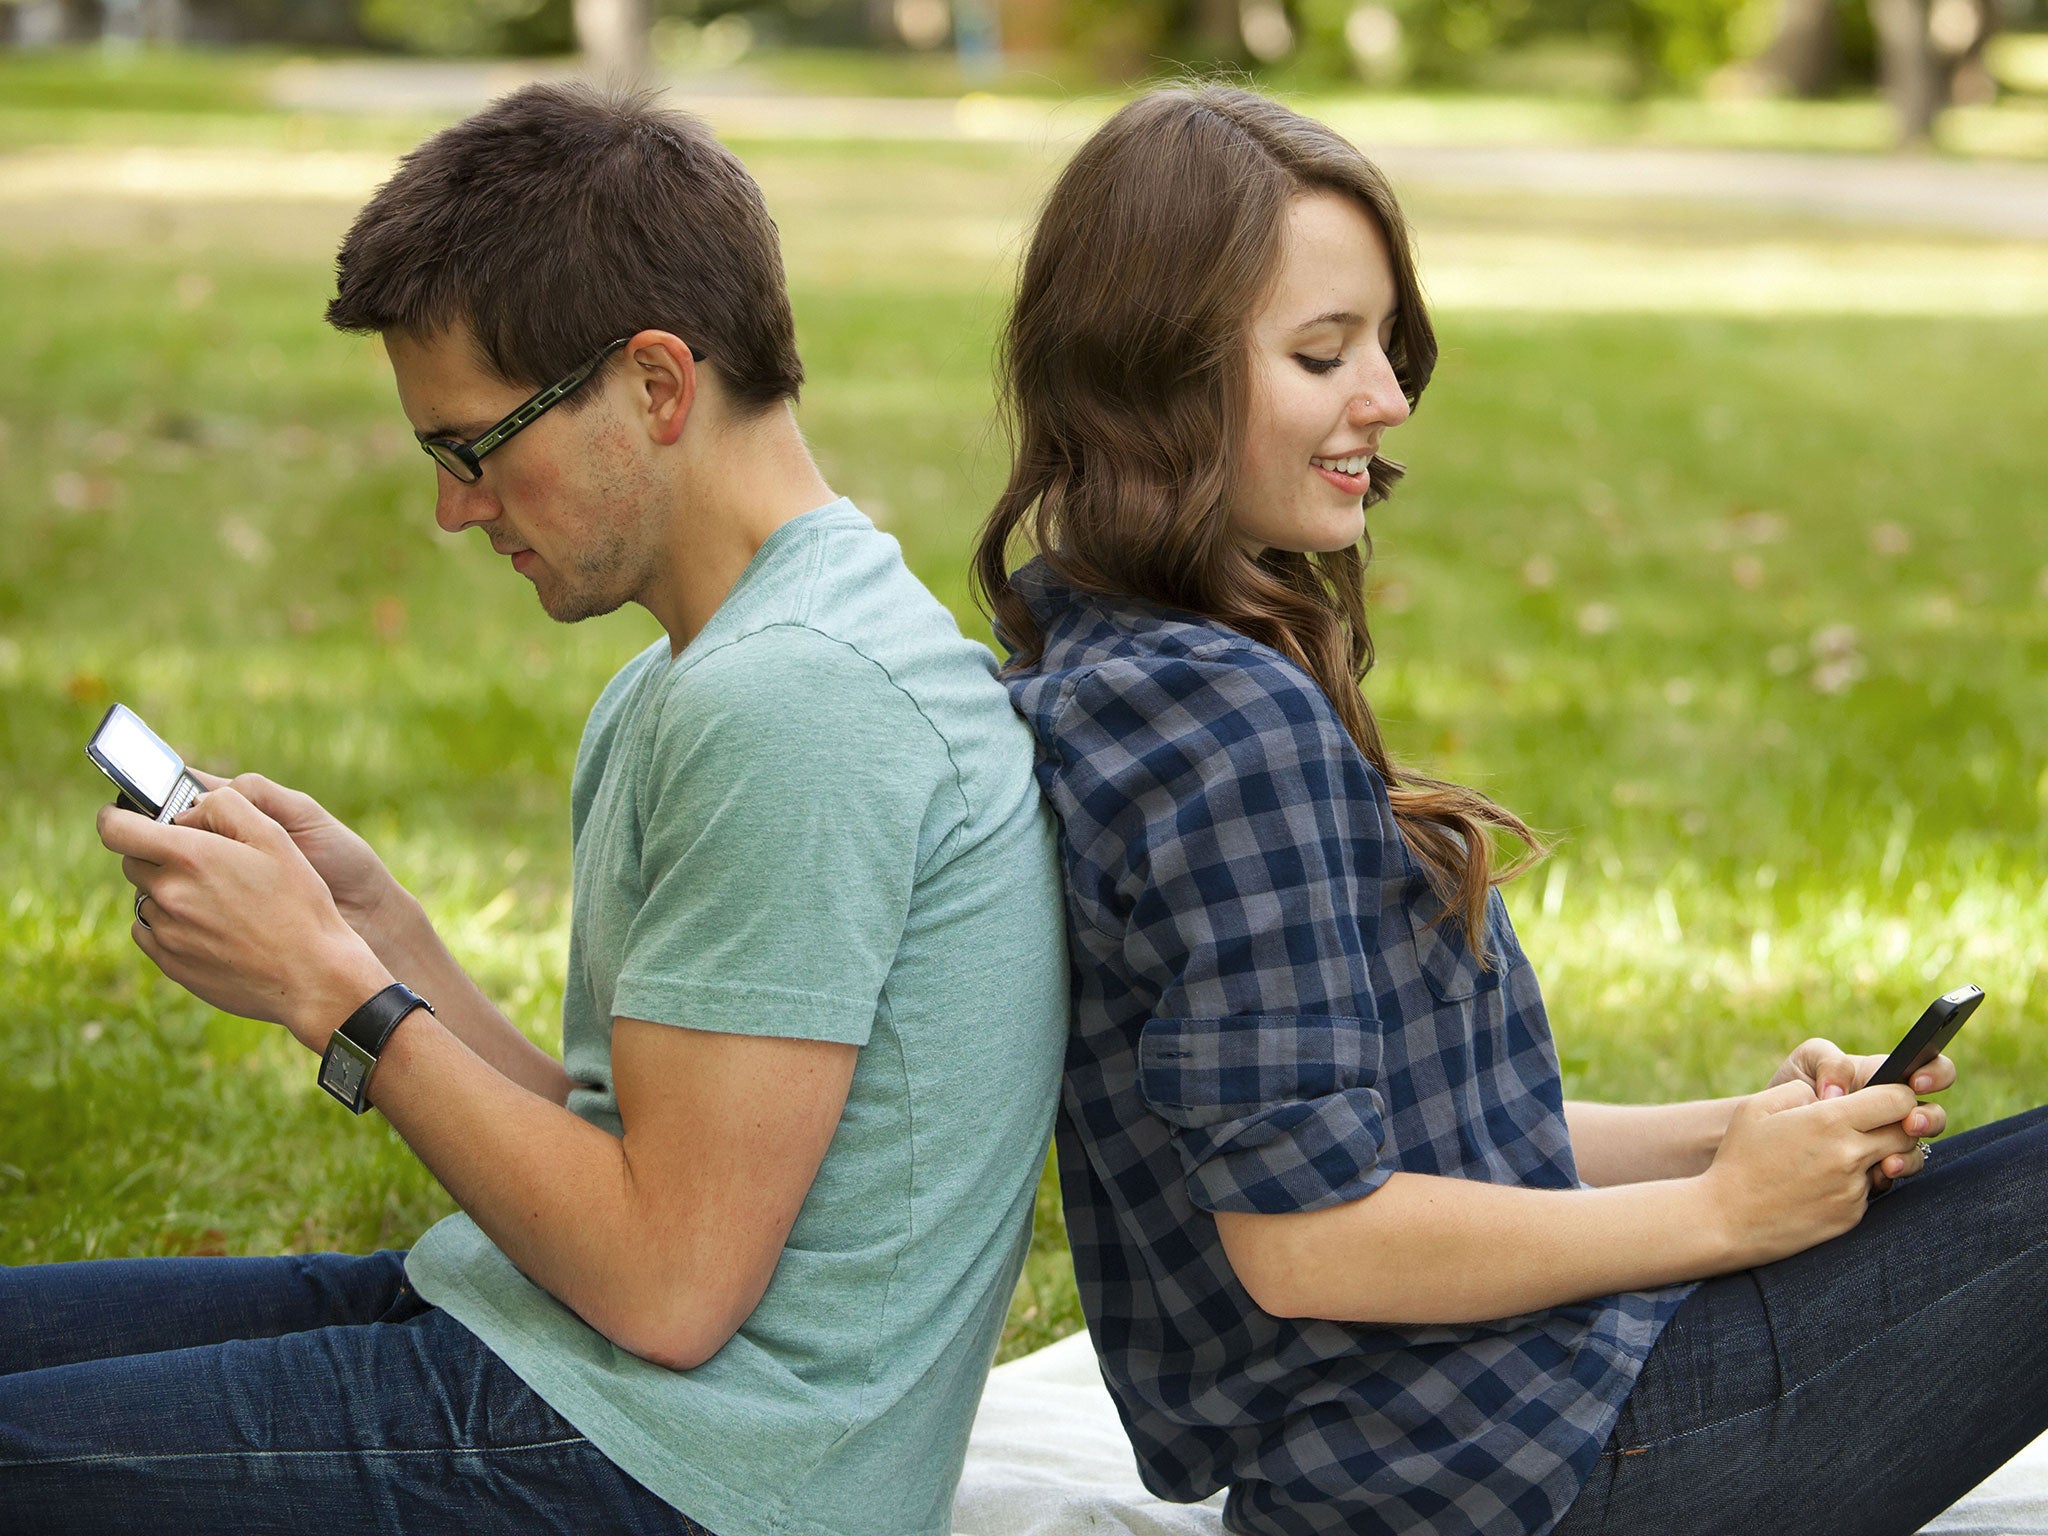 Text messaging changes as a relationship evolves